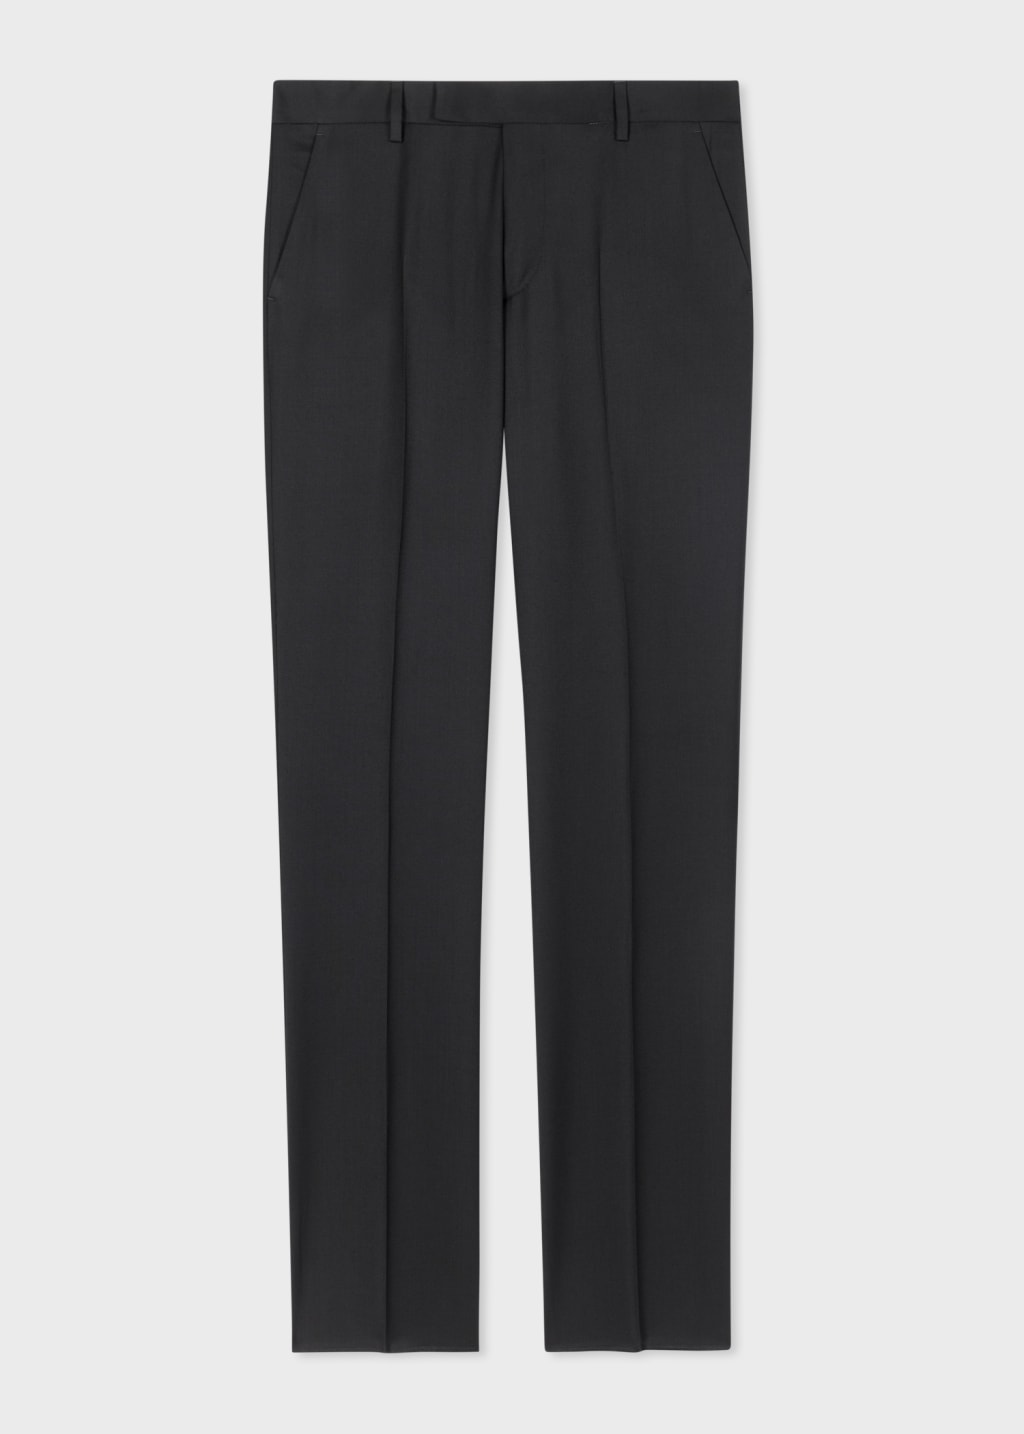 Product View - Tailored-Fit Black Wool Twill Two-Button Suit by Paul Smith